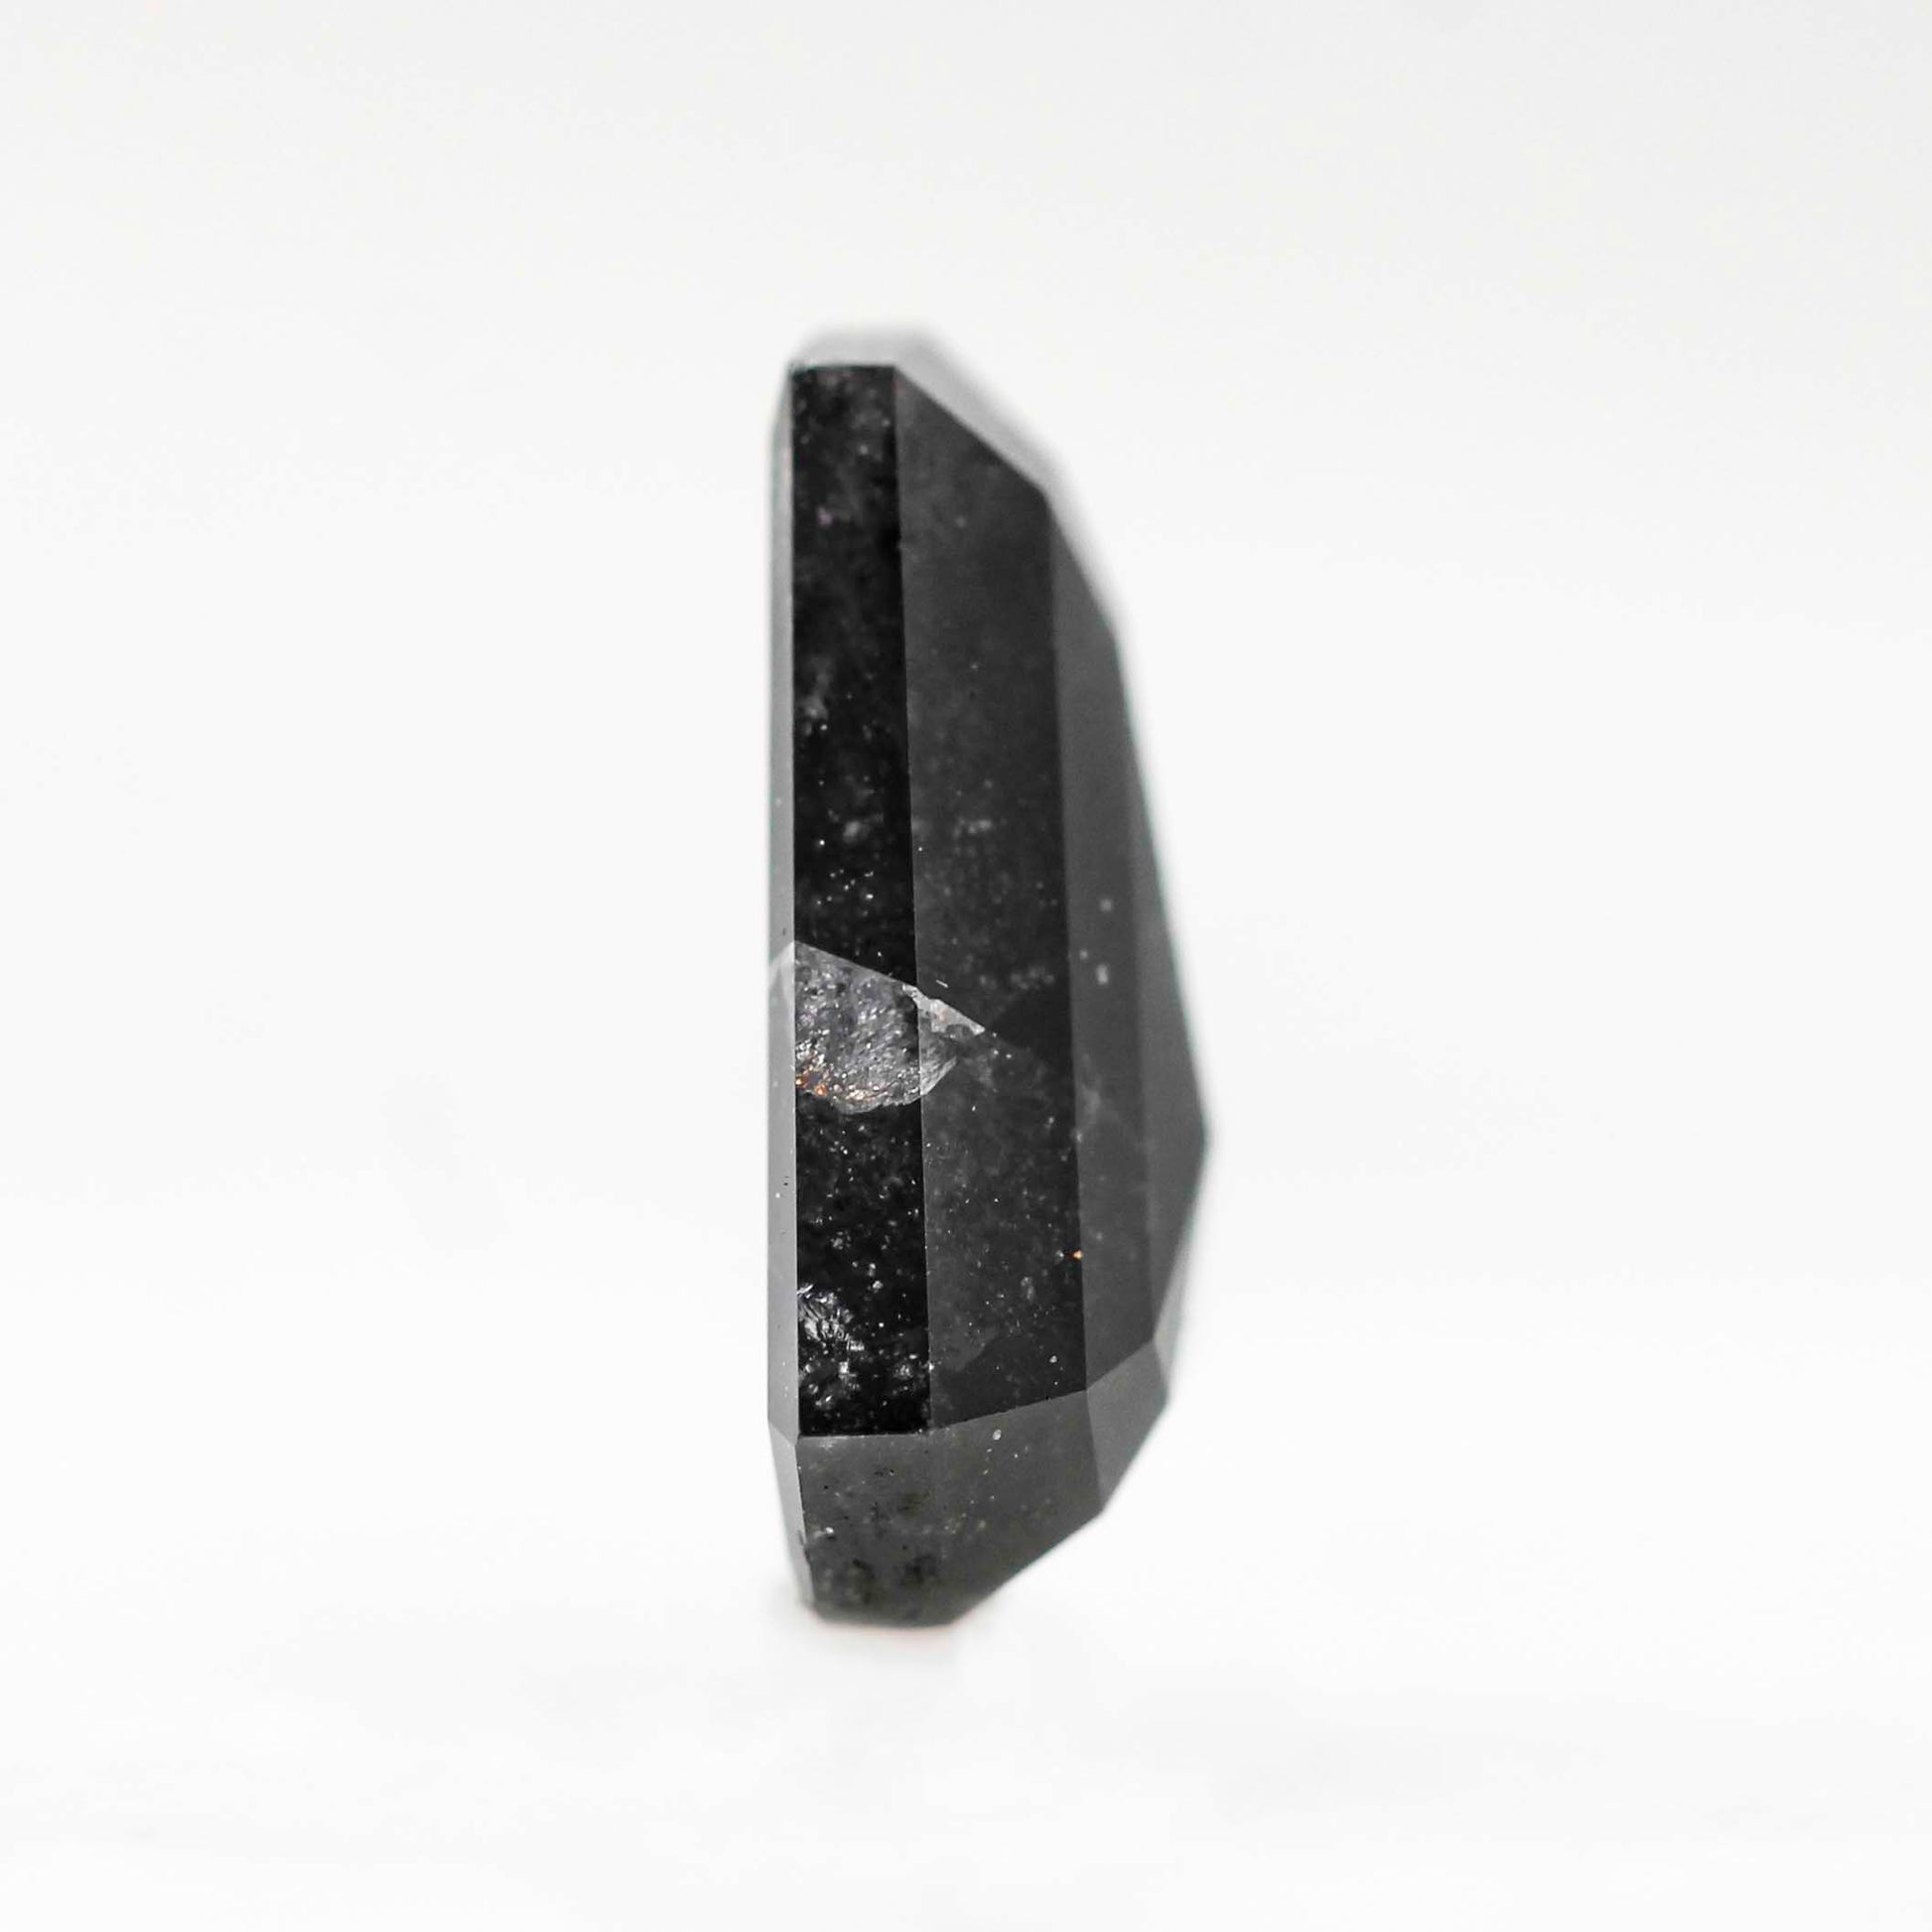 1.50 Carat Black Celestial Elongated Trapezoid Diamond for Custom Work - Inventory Code BCT150 - Midwinter Co. Alternative Bridal Rings and Modern Fine Jewelry